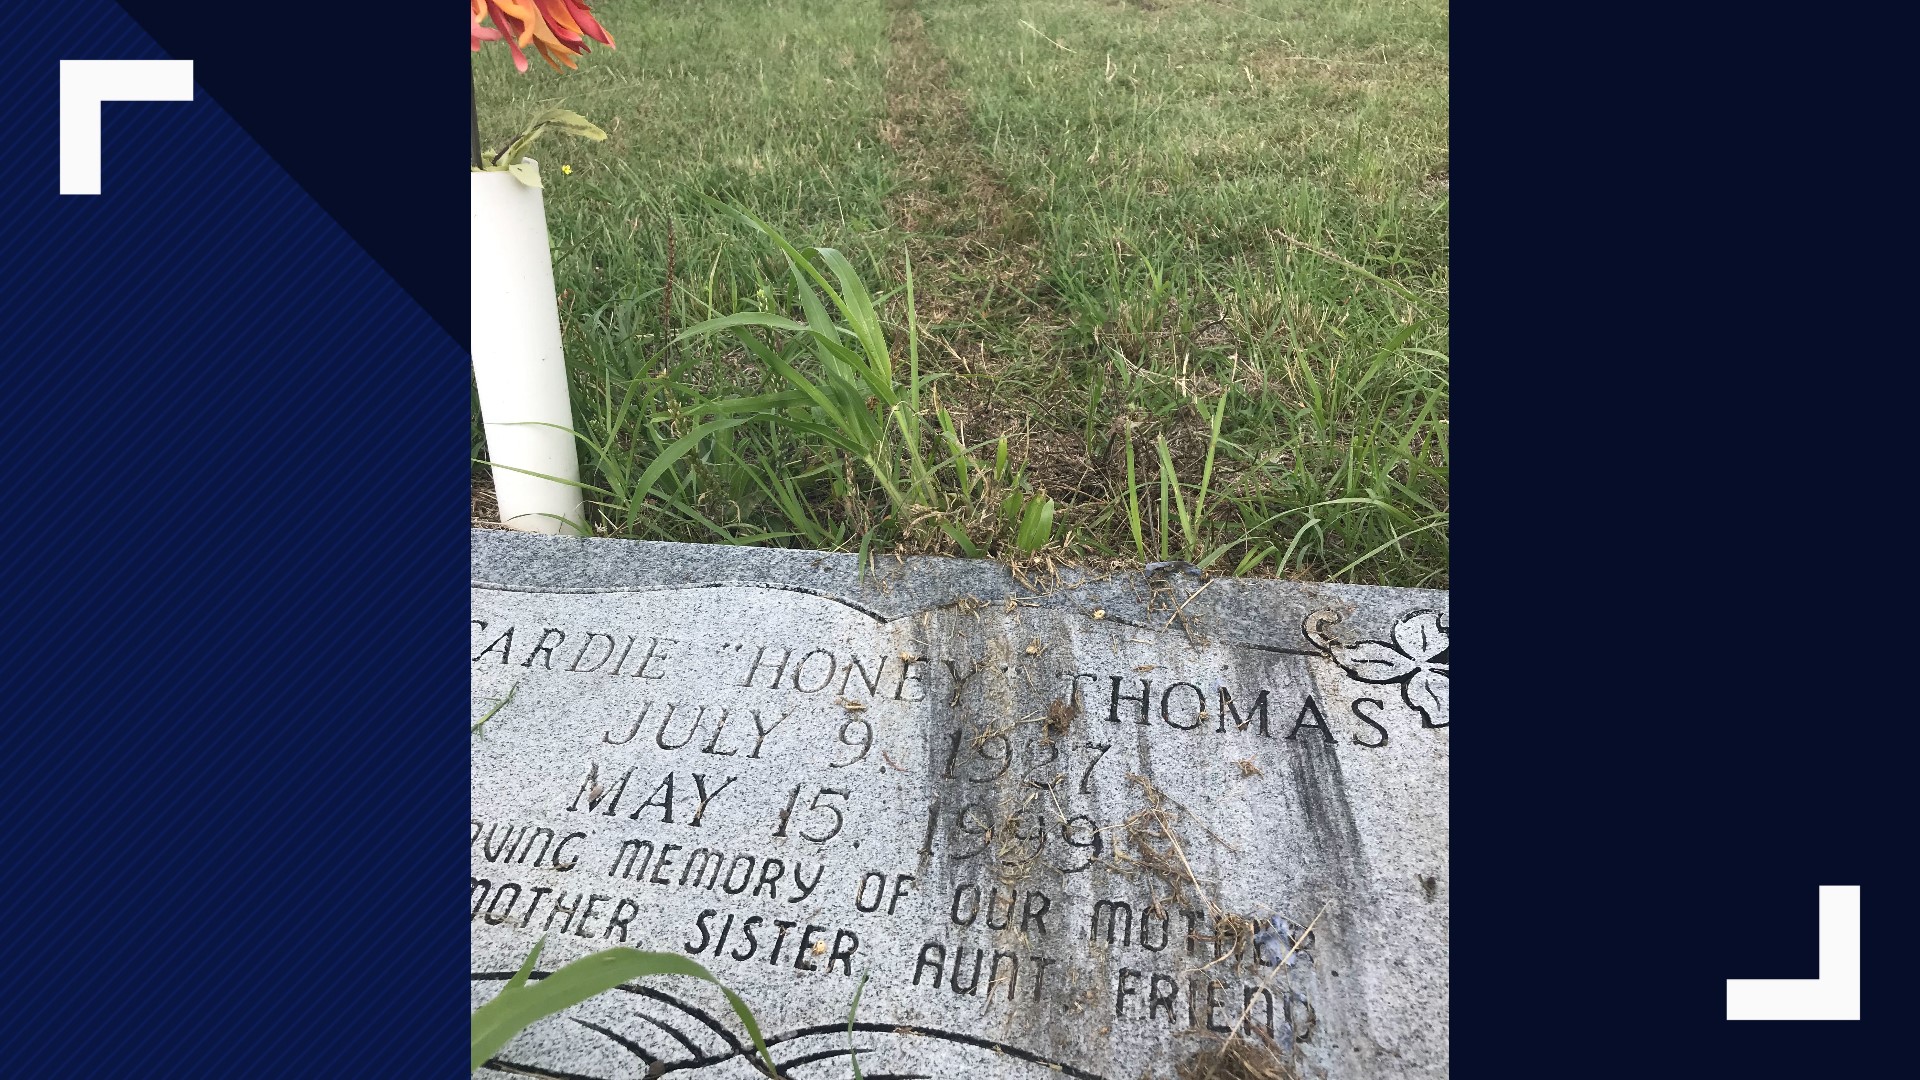 Central Texans with loved ones buried in Moody's Mount Zion Cemetery were angry after the cemetery was vandalized.